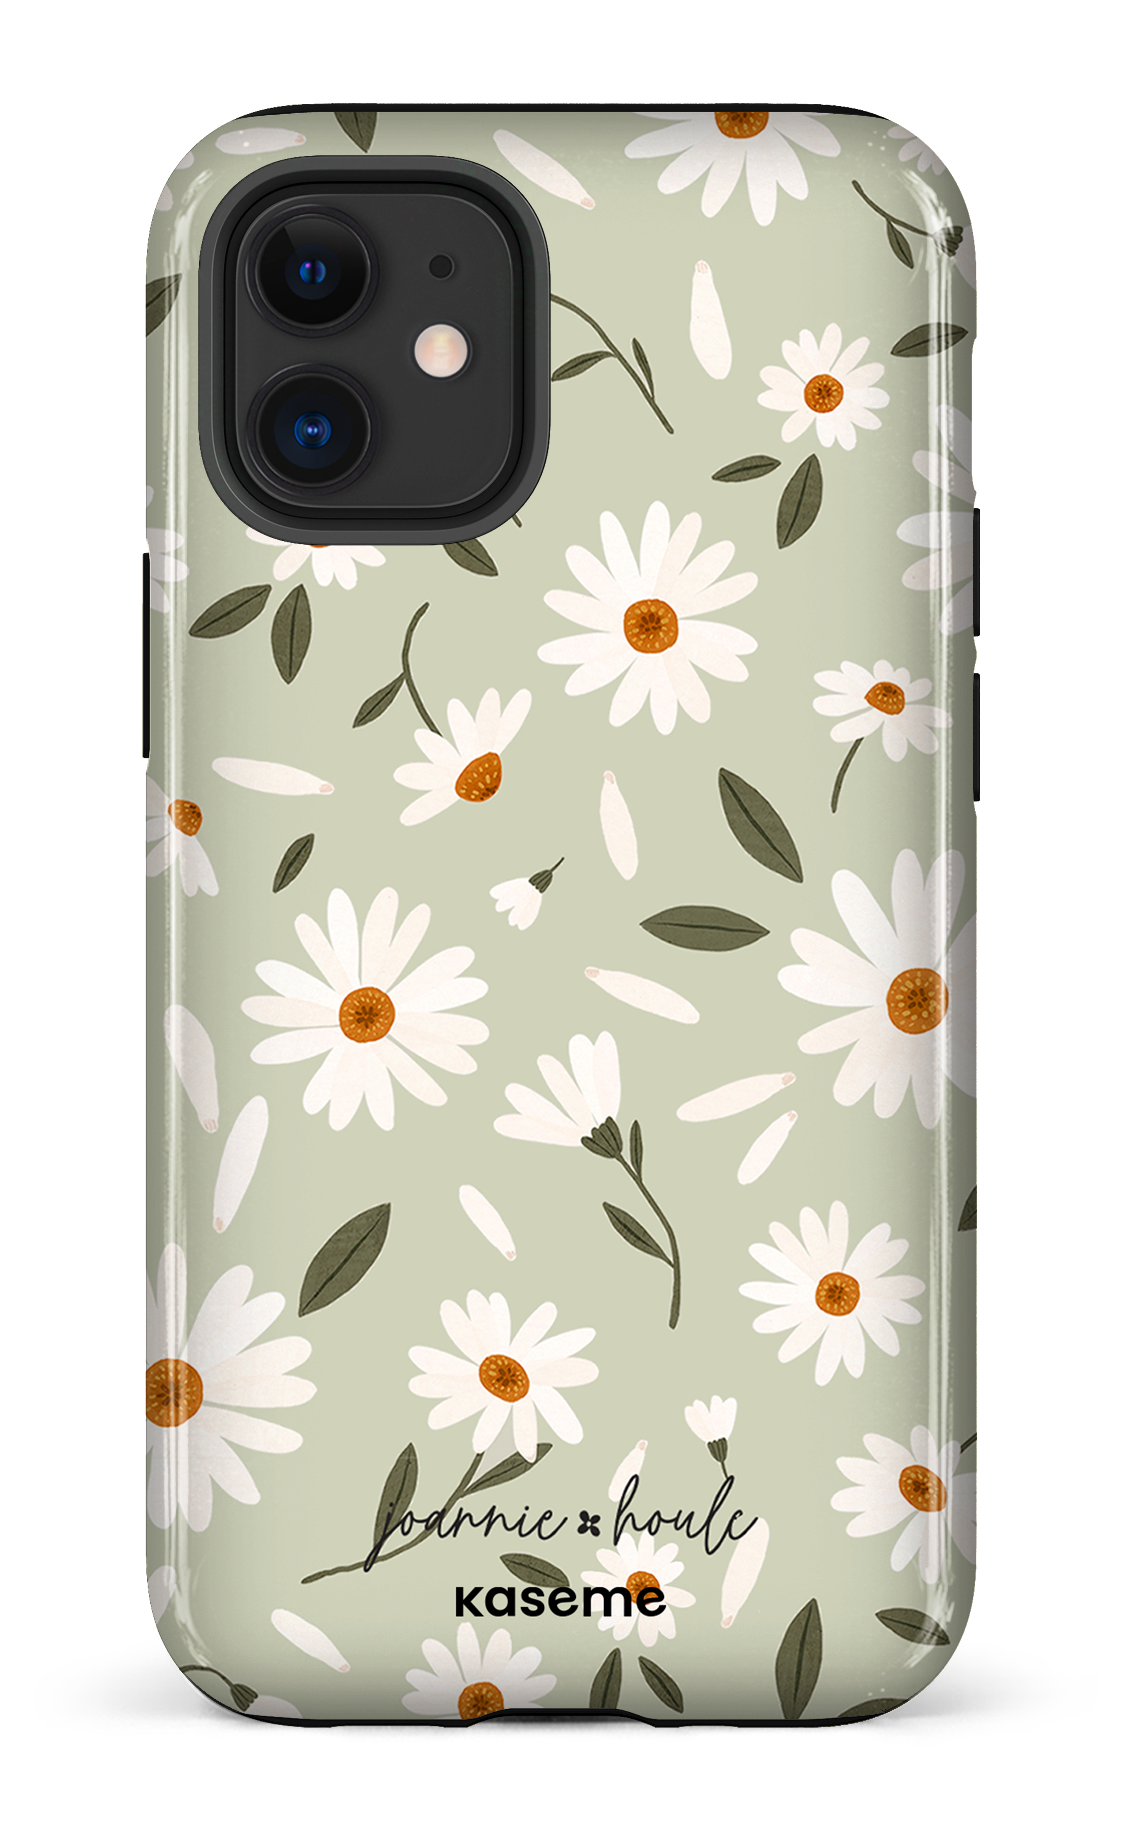 Daisy Bouquet Sage by Joannie Houle - iPhone 12 Mini